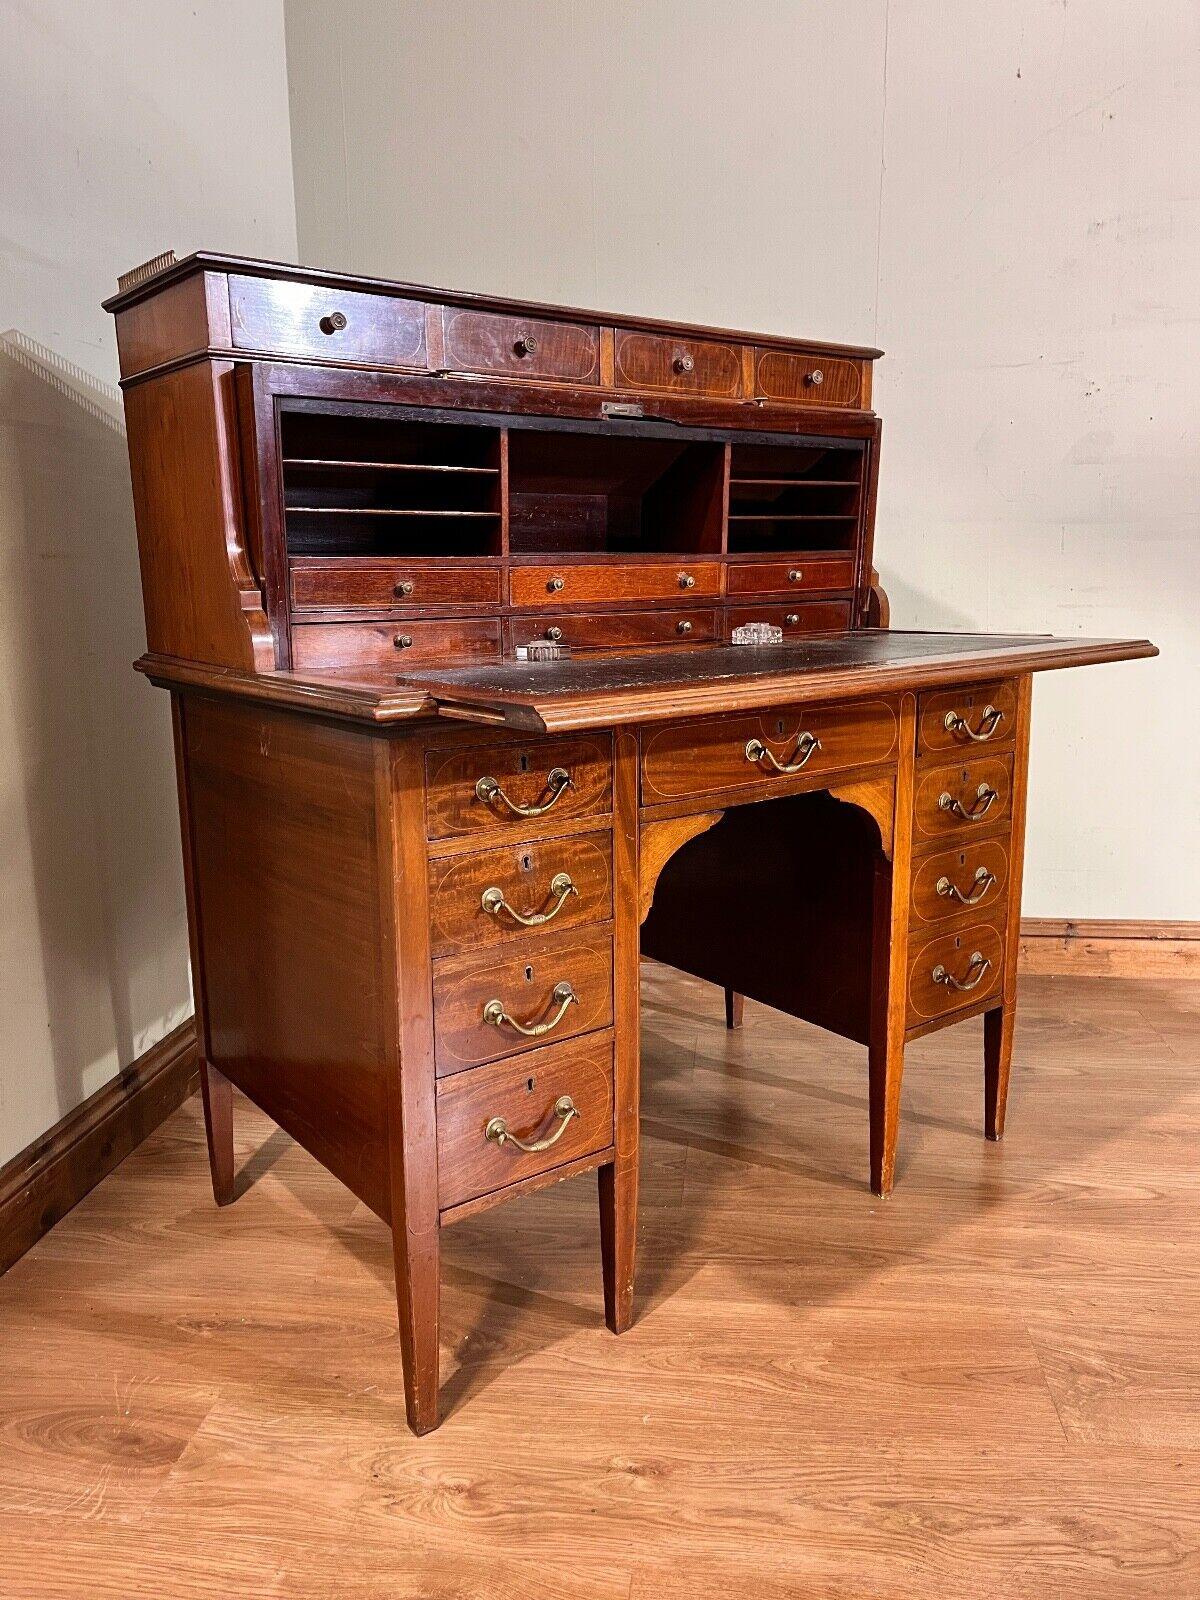 Antique Edwardian roll top desk in the Sheraton manner
Roll top opens up to reveal leather topped writing surface and lots of drawers and cubby holes
Features a brass gallery to the top of the desk
Gorgeous 19th Century antique
Nine drawers around